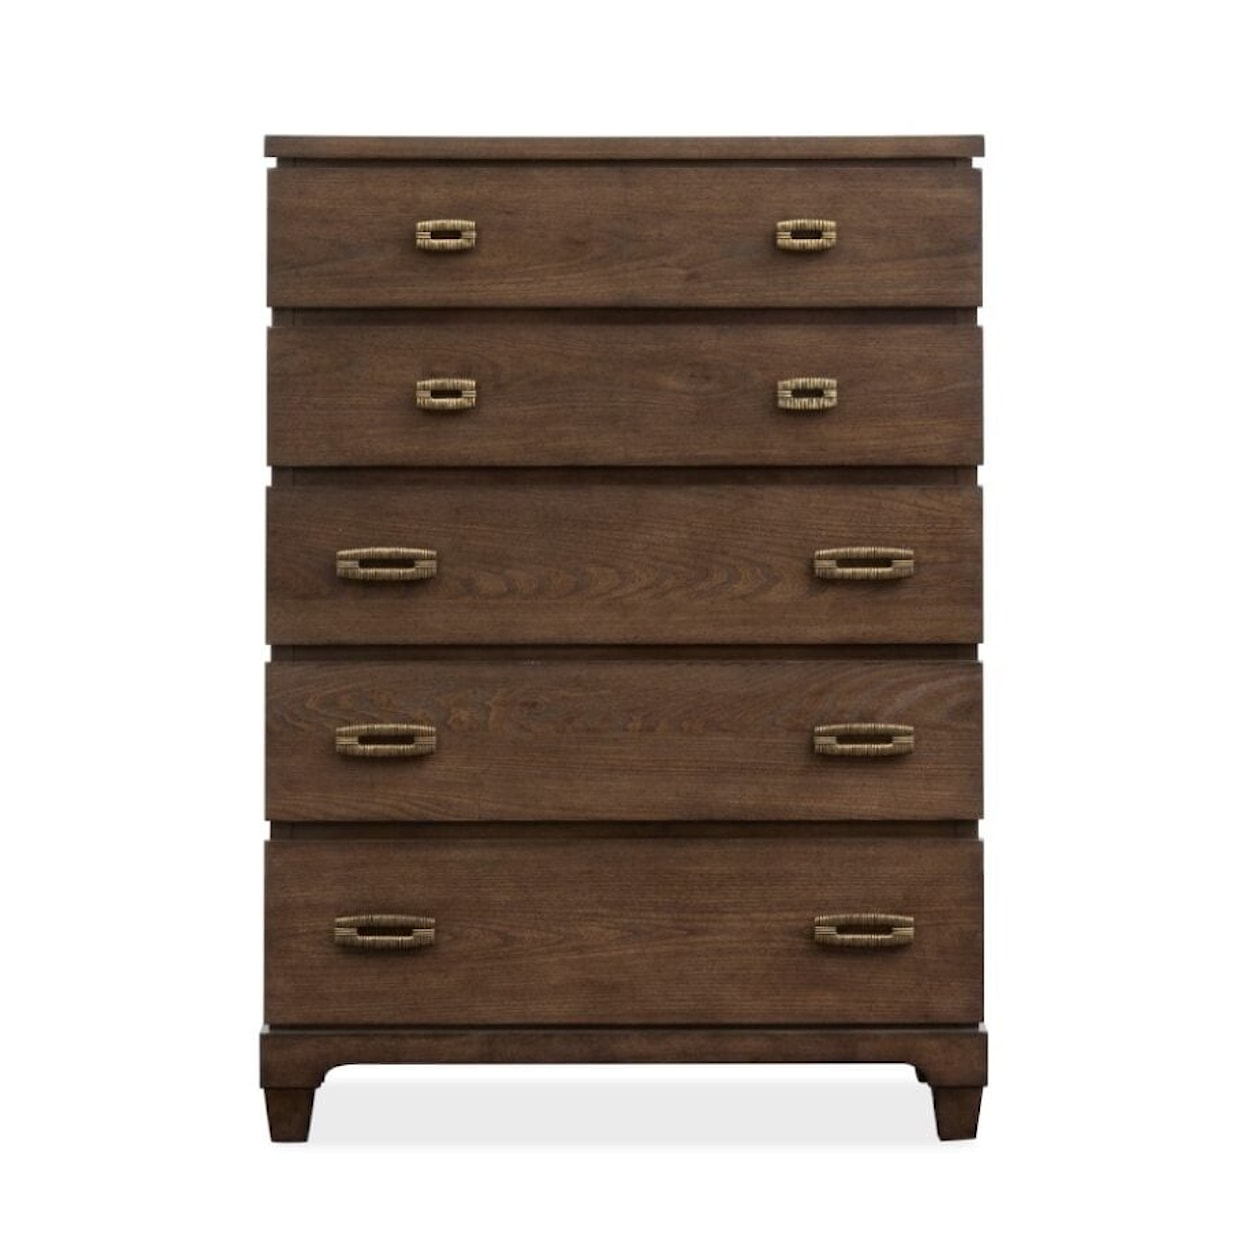 Magnussen Home Sugar Mill Bedroom Chest of Drawers